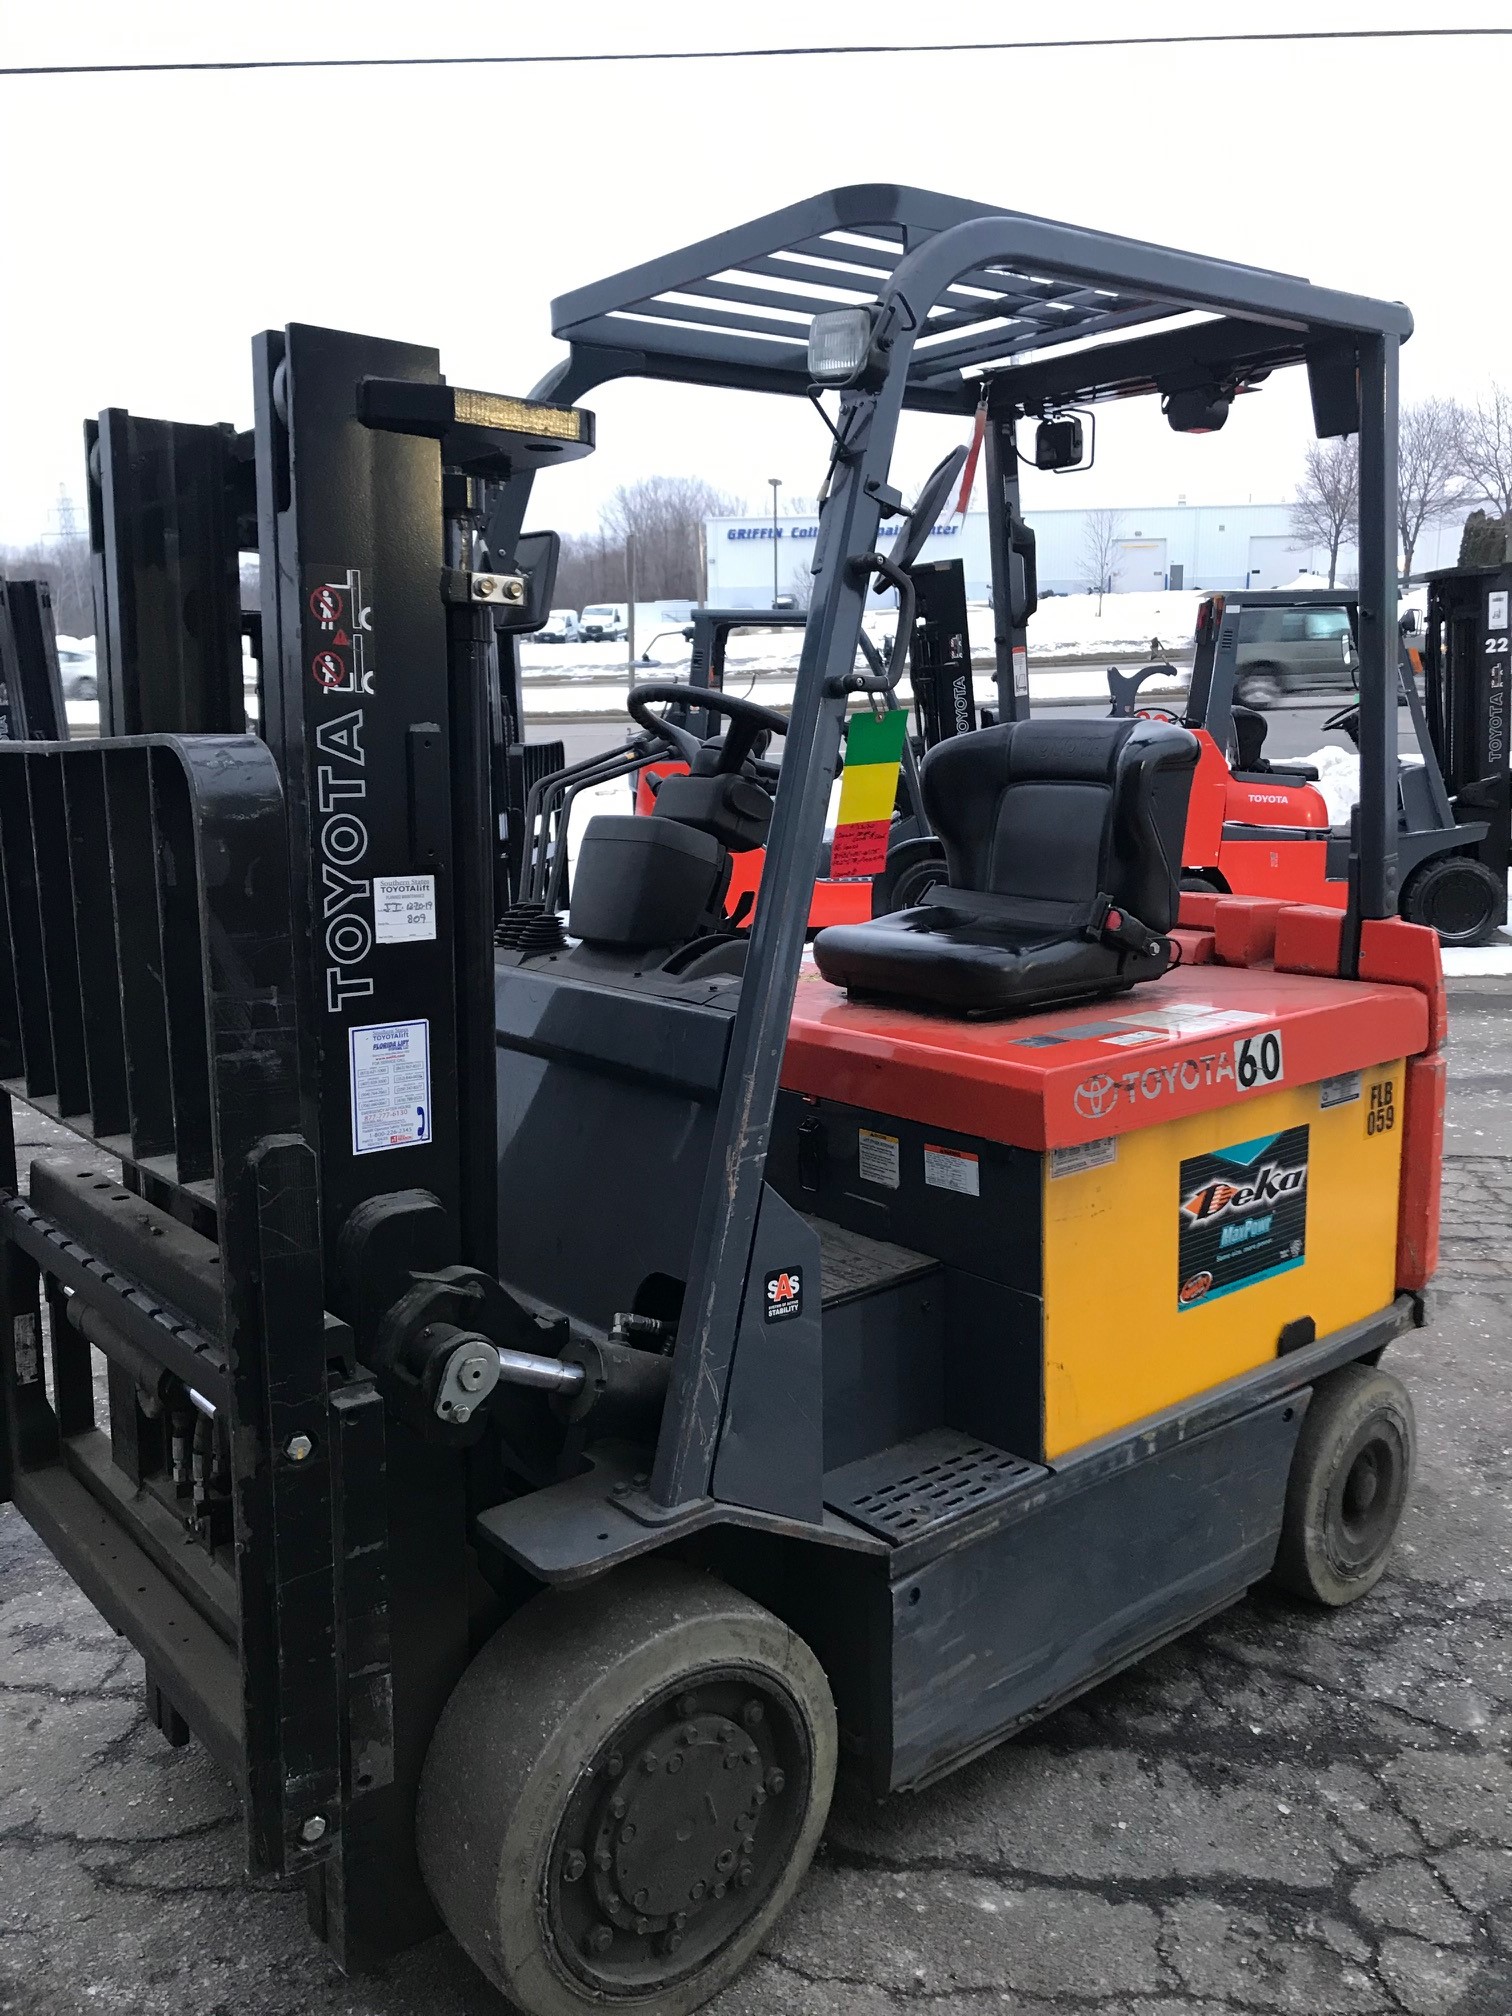 used stand up forklift for sale near me